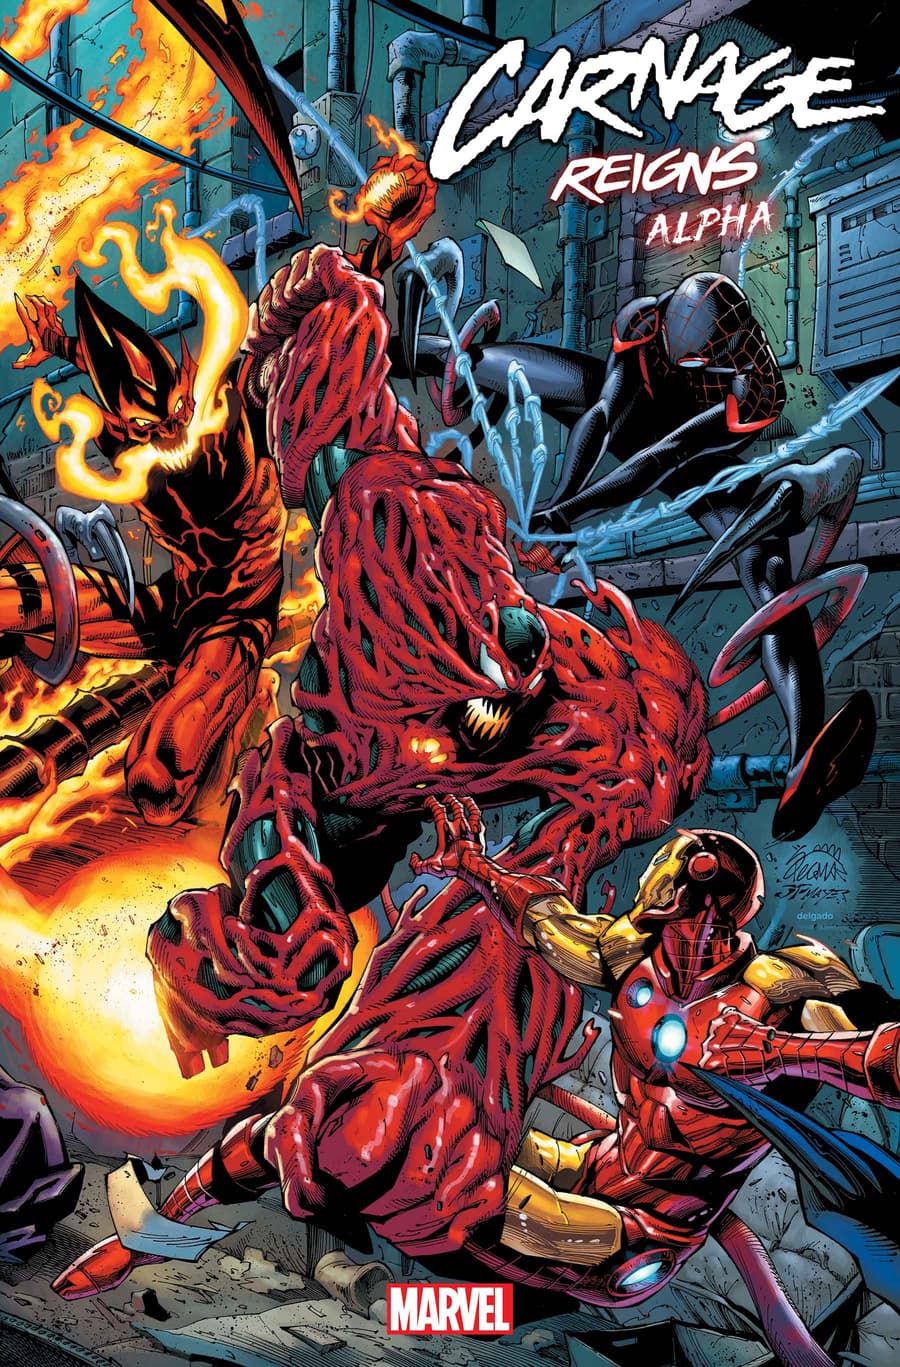 CARNAGE REIGNS ALPHA #1 cover by Ryan Stegman